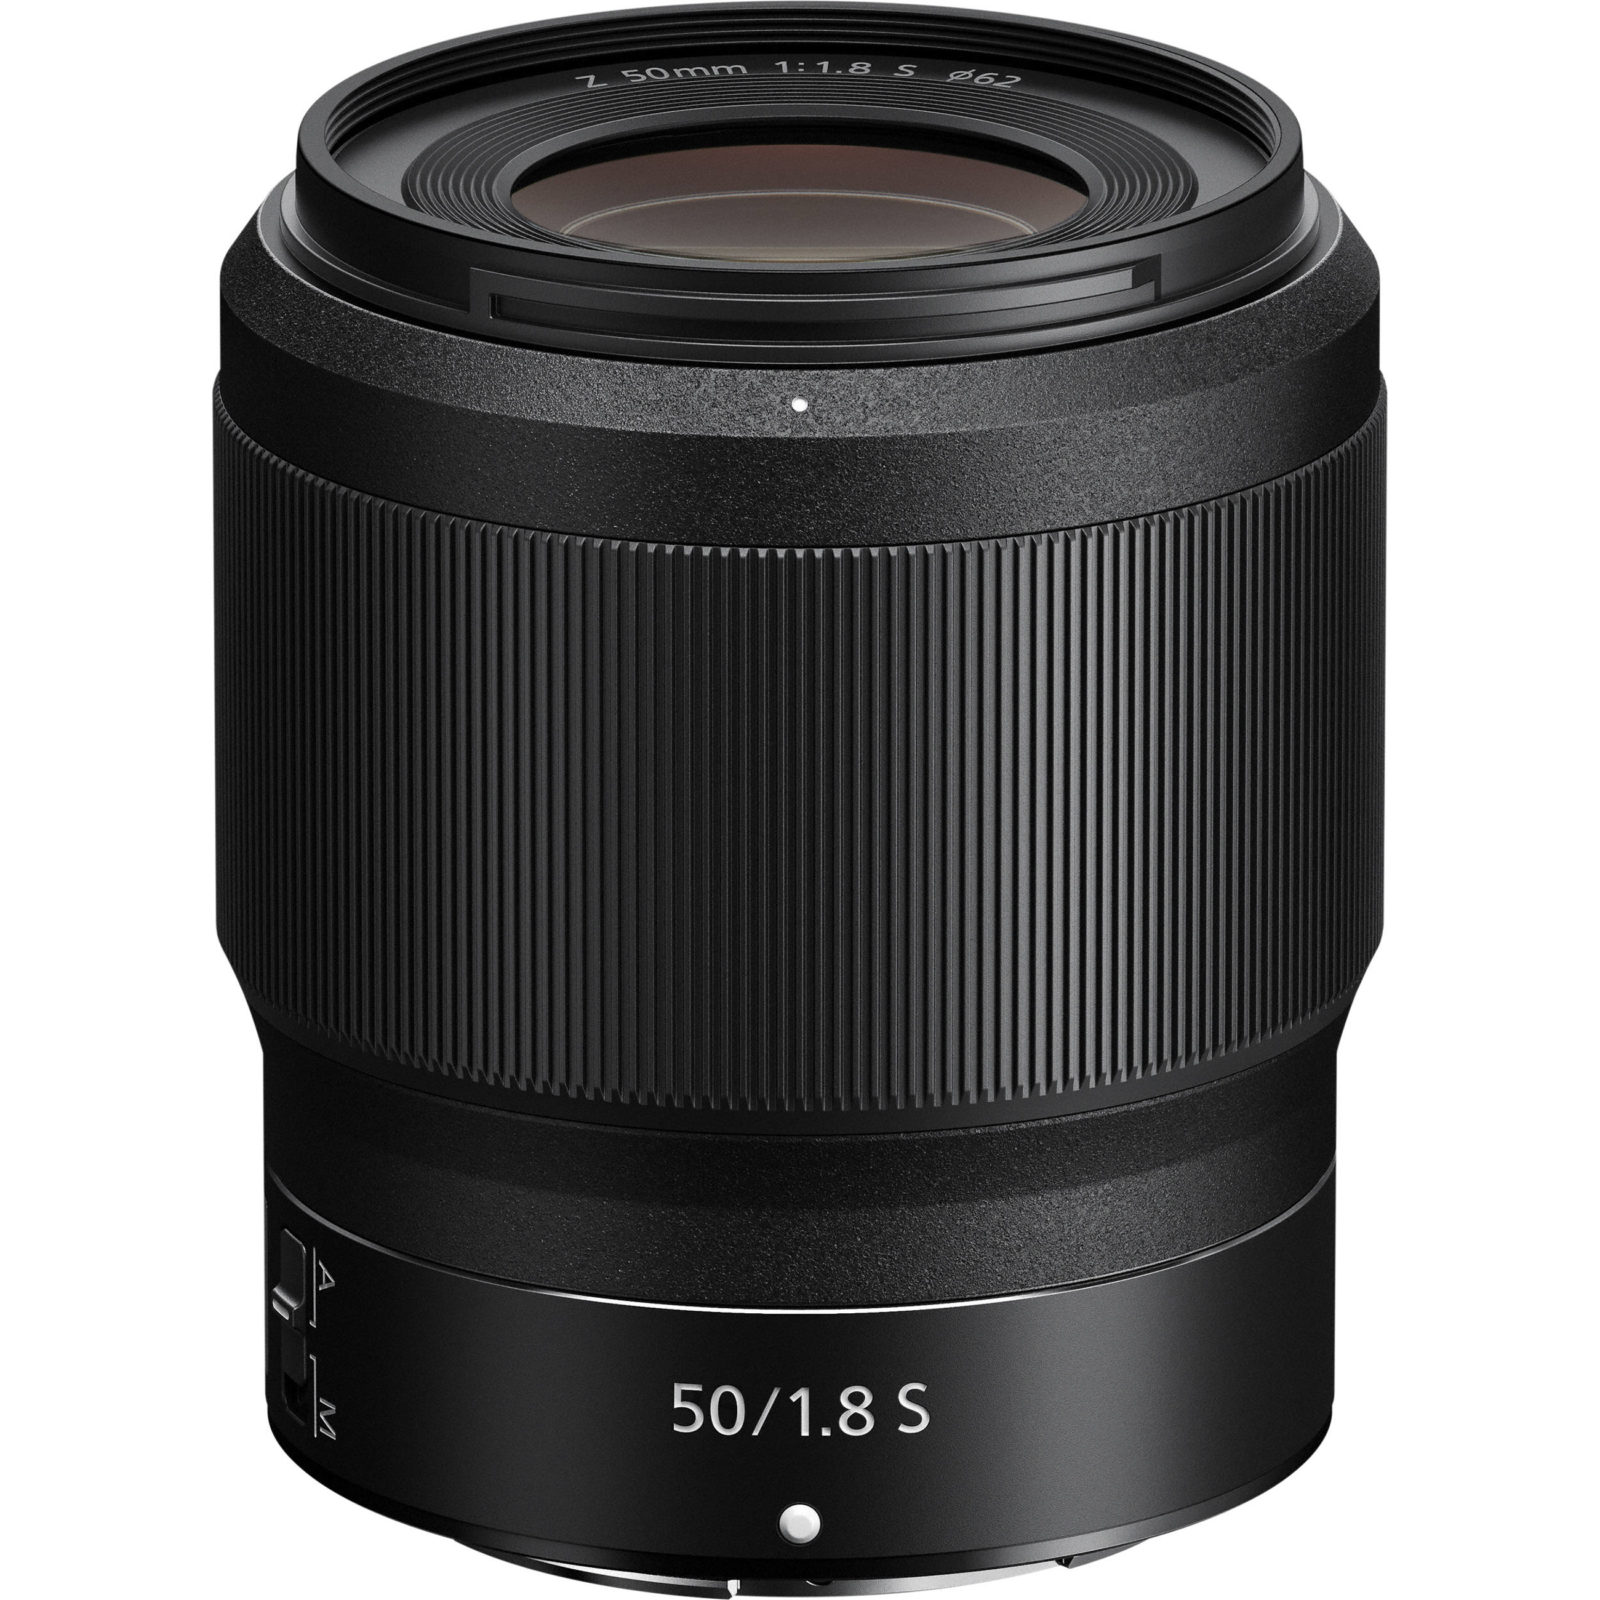 remember not all 50mm f/1.8 lenses are created equal